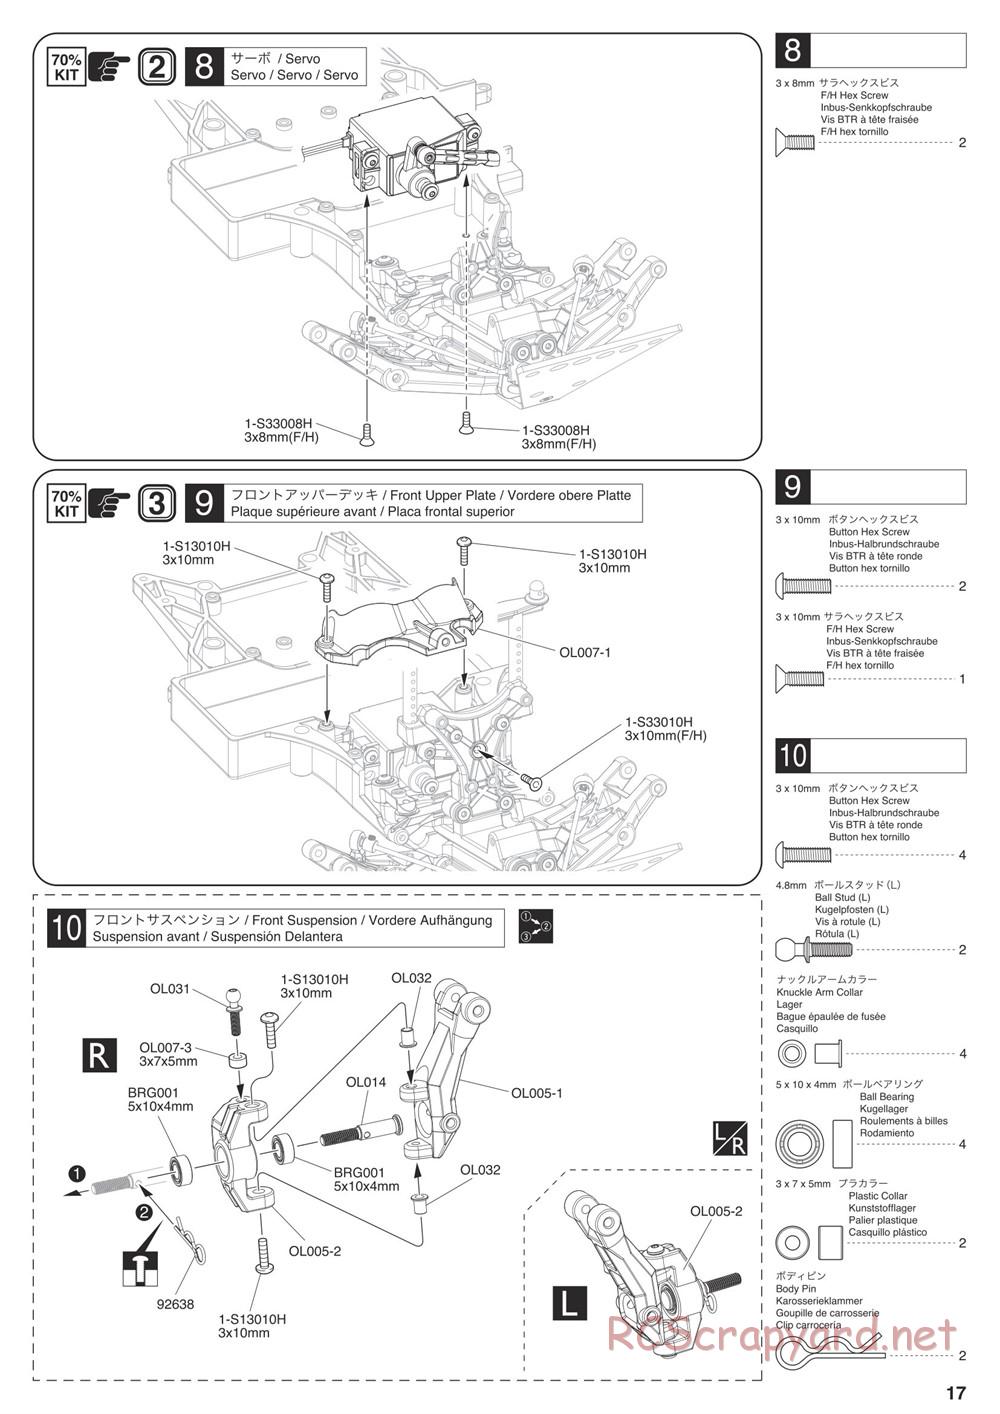 Kyosho - Outlaw Rampage Pro - Manual - Page 17